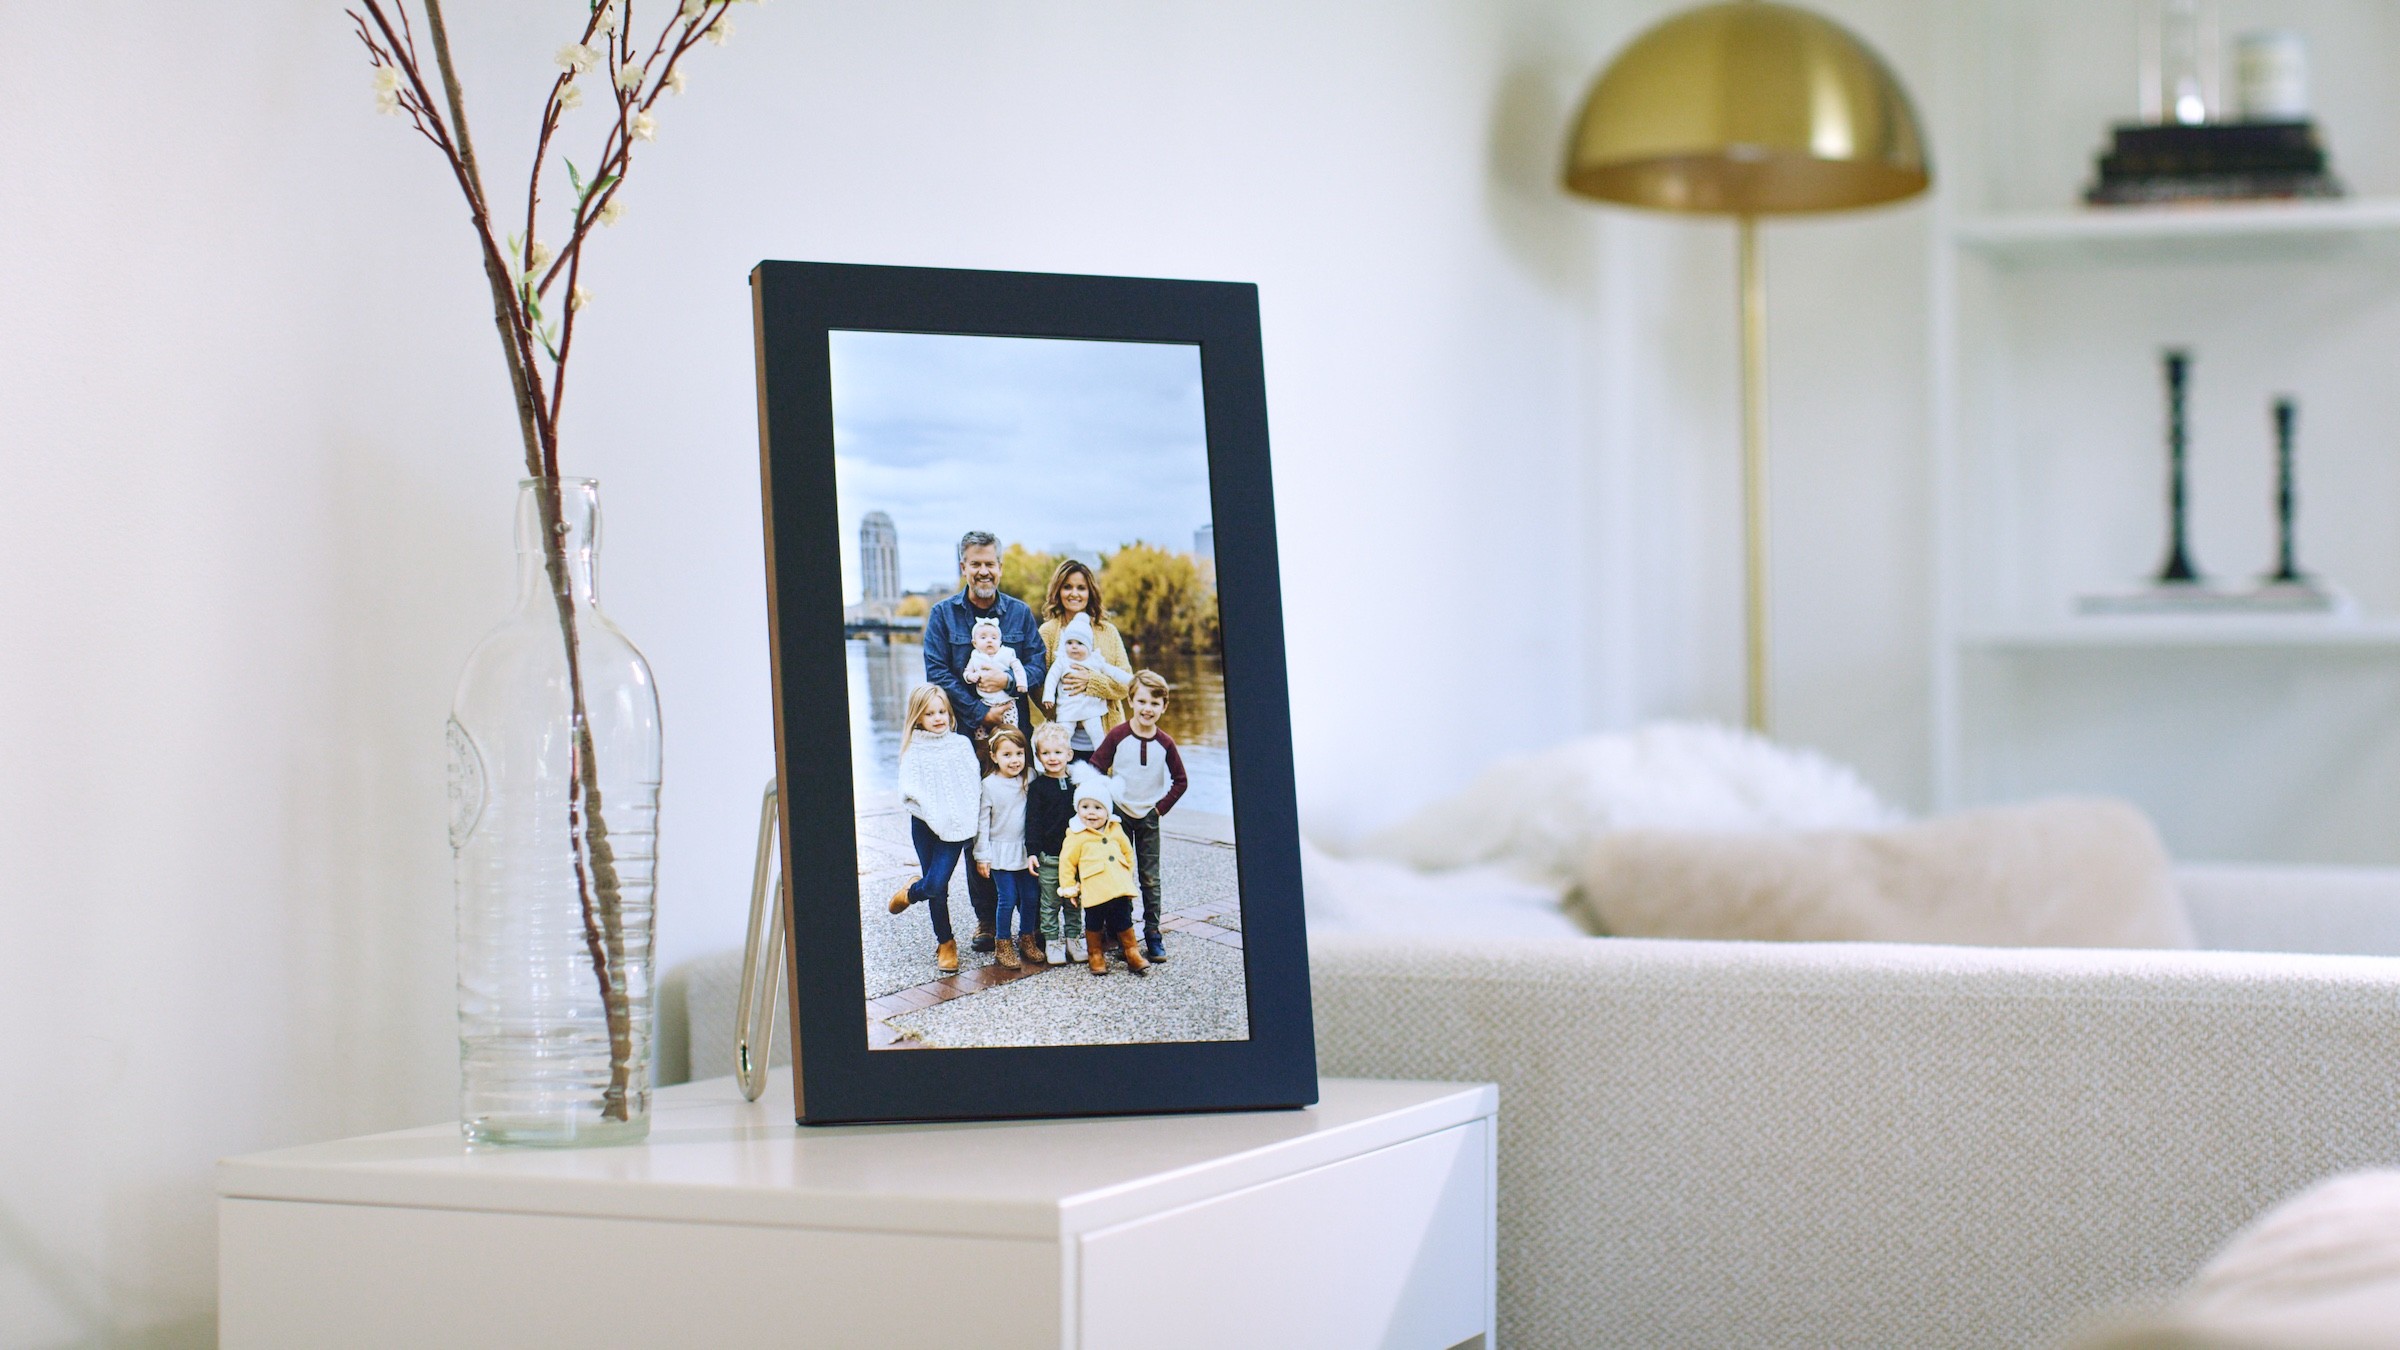 Netgear debuts a new 15.6-inch Meural WiFi Photo Frame with automatic album syncing